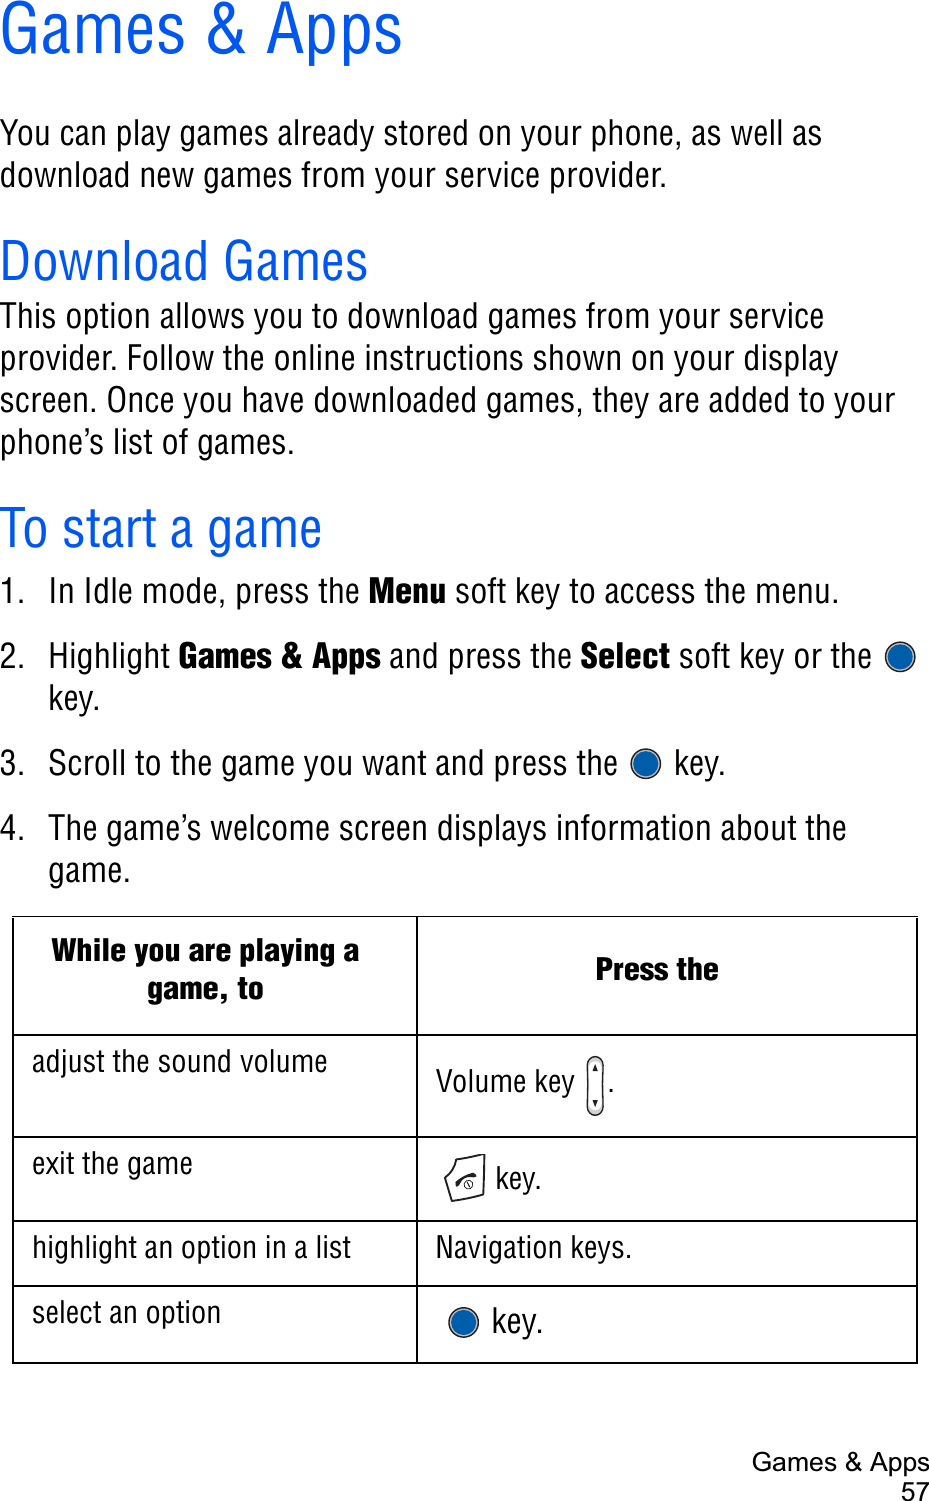 Games &amp; Apps57Games &amp; AppsYou can play games already stored on your phone, as well as download new games from your service provider.Download GamesThis option allows you to download games from your service provider. Follow the online instructions shown on your display screen. Once you have downloaded games, they are added to your phone’s list of games.To start a game1. In Idle mode, press the Menu soft key to access the menu.2. Highlight Games &amp; Apps and press the Select soft key or the   key.3. Scroll to the game you want and press the   key.4. The game’s welcome screen displays information about the game.While you are playing a game, to Press theadjust the sound volume Volume key  .exit the game  key.highlight an option in a list Navigation keys.select an option   key.